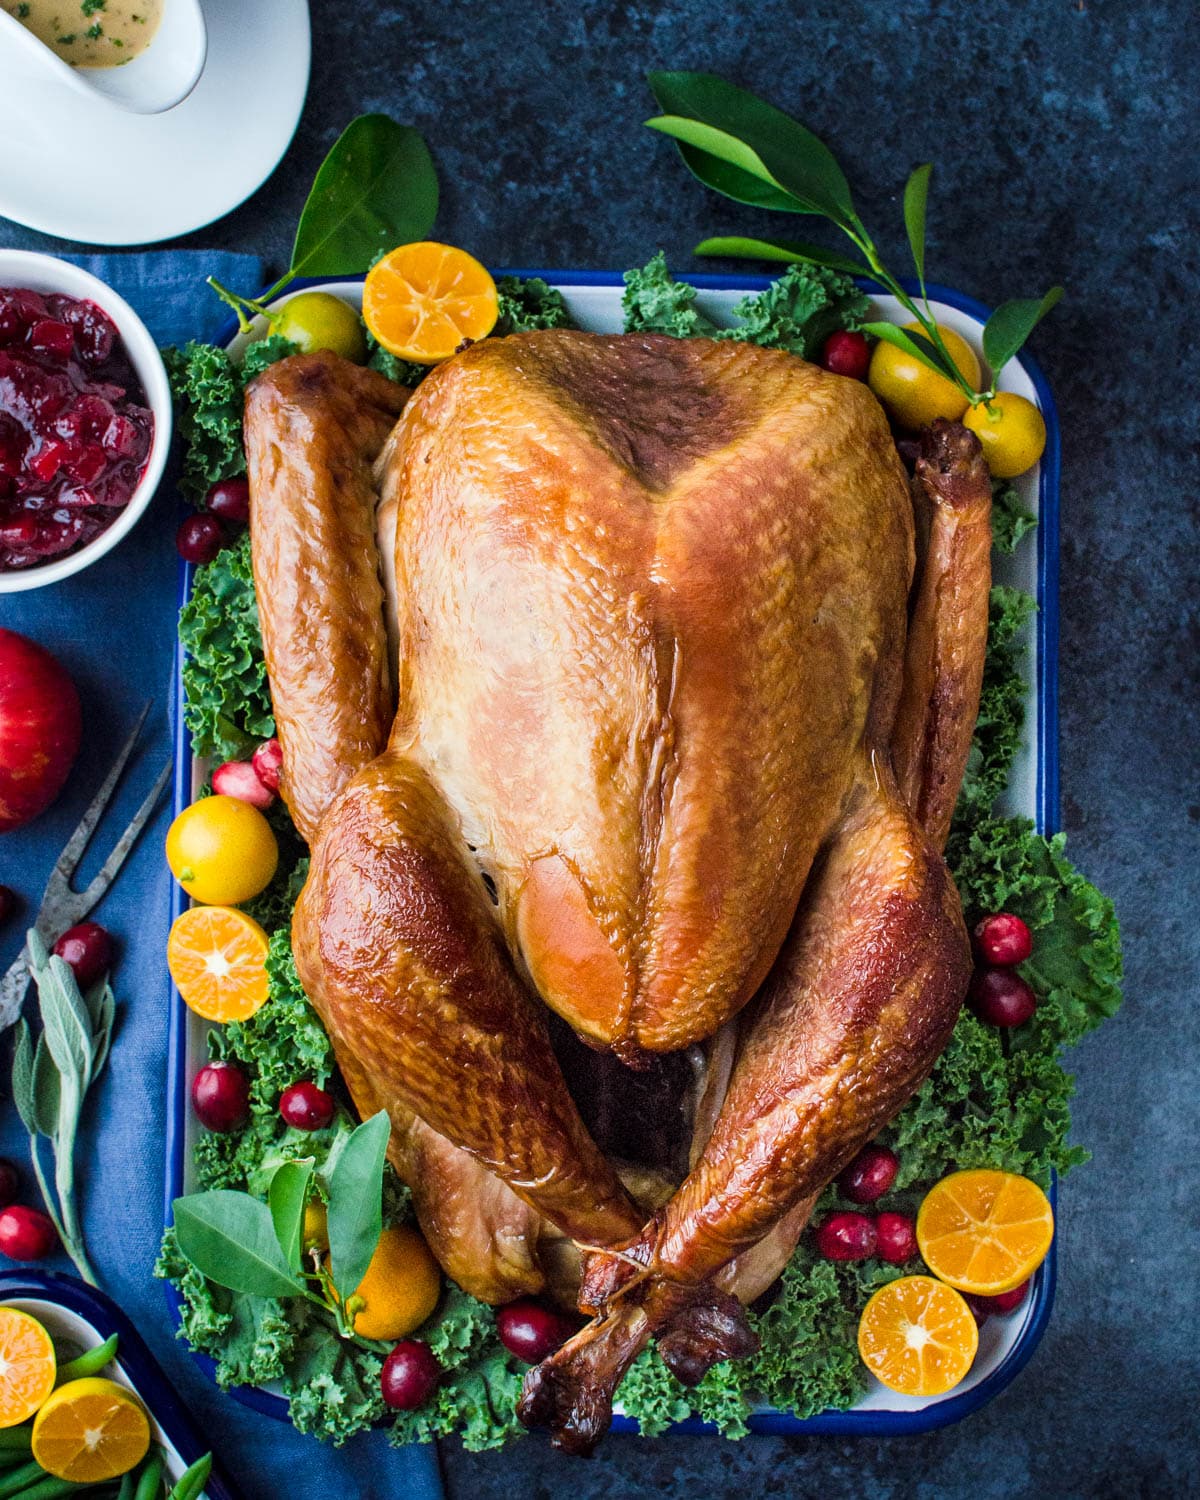 A white platter laden with greenery, fruits, and the whole smoked turkey as the centerpiece.